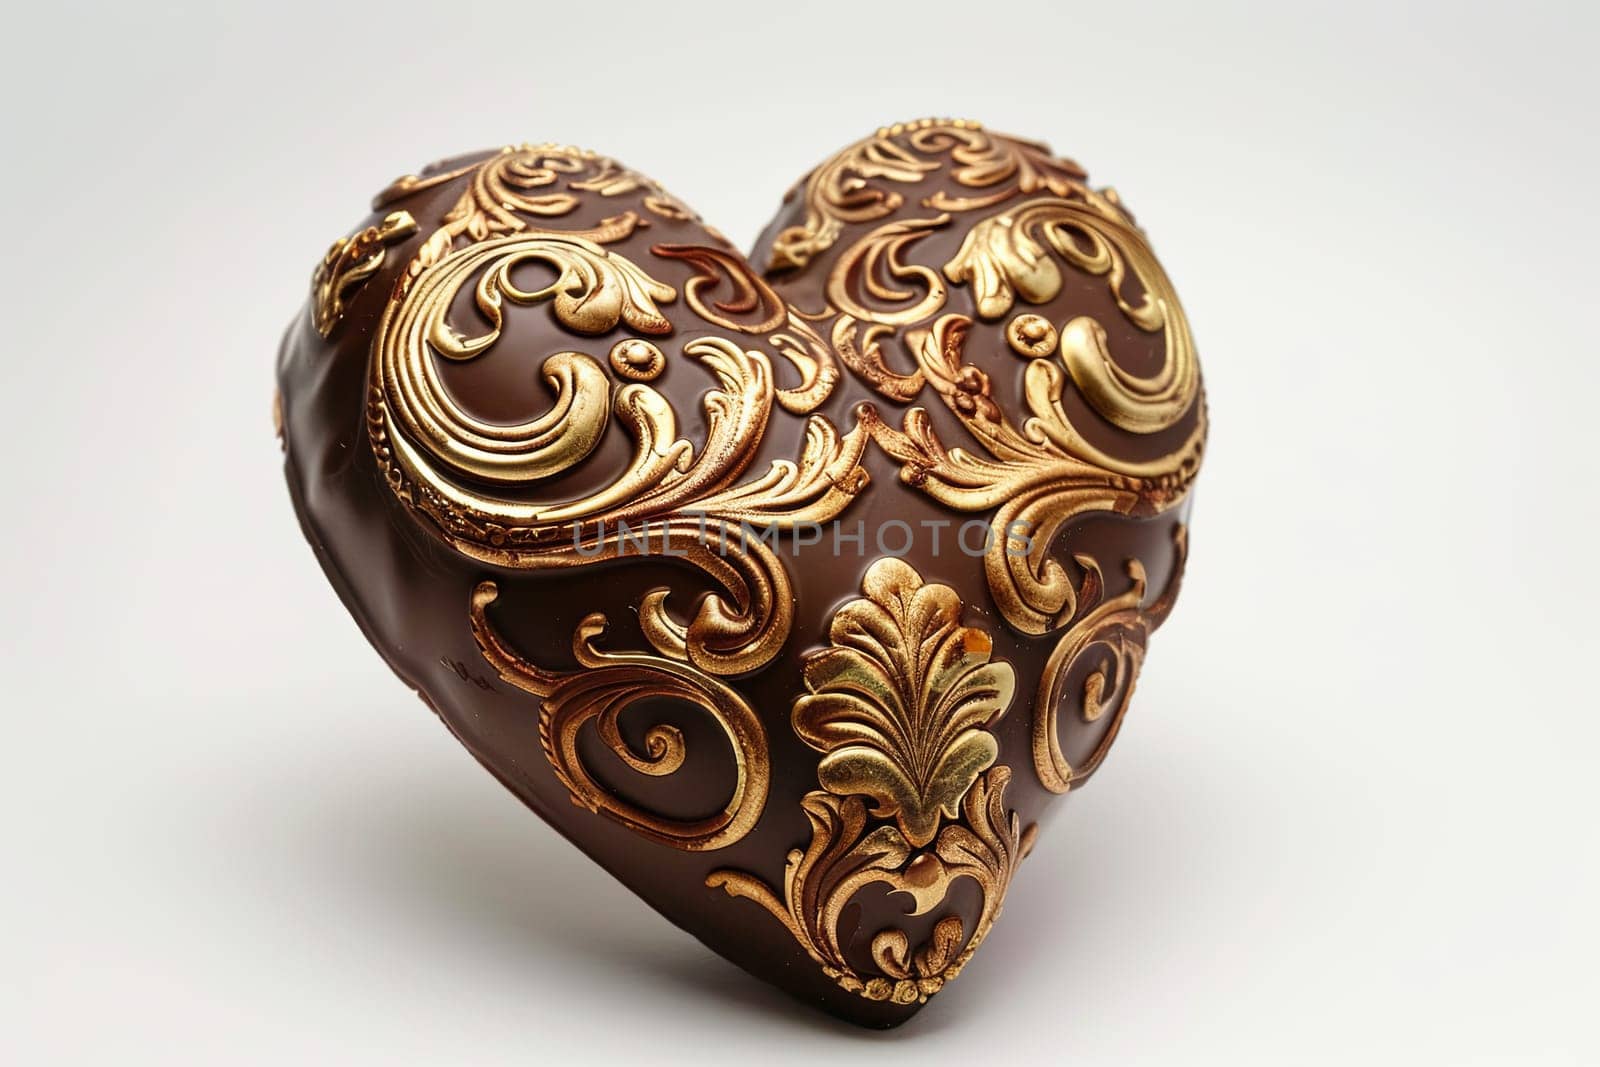 A heart shaped chocolate box adorned with intricate gold decorations, set against a white background.